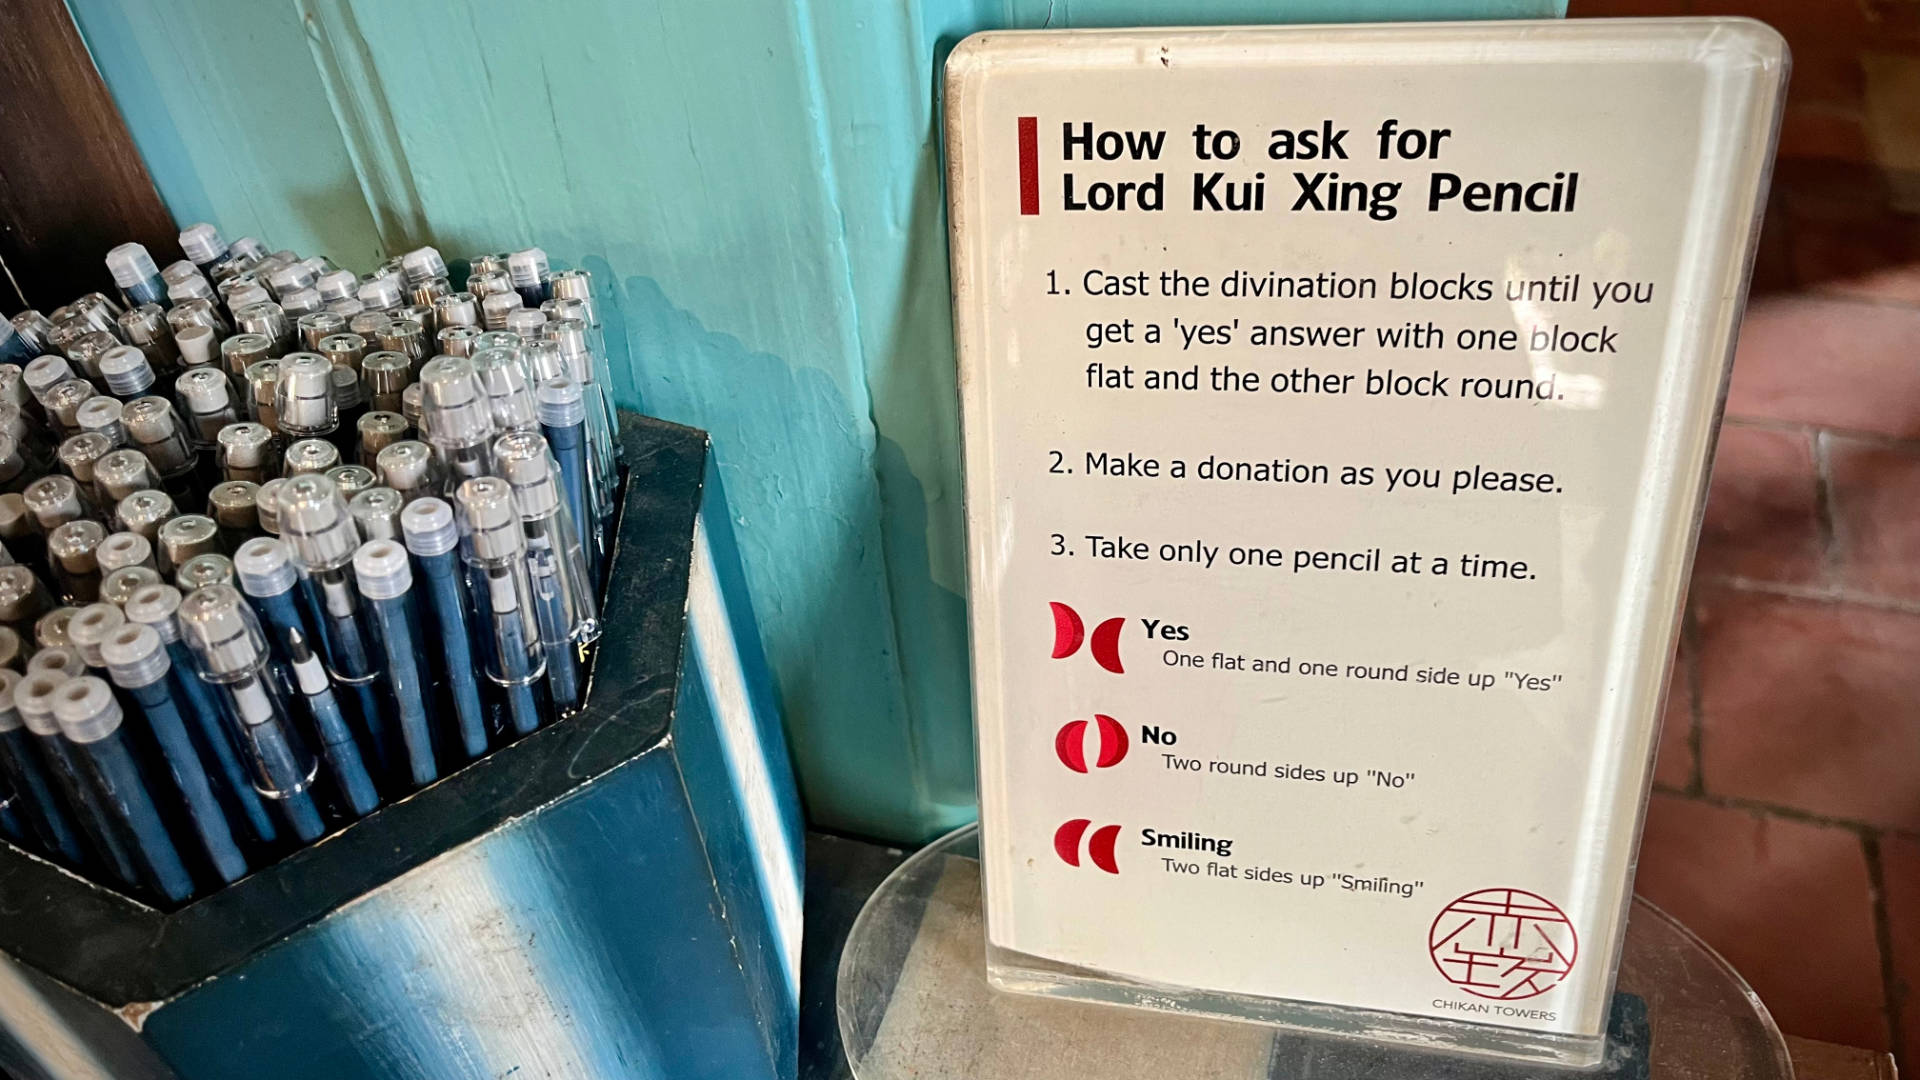 A hexagonal wooden container full of pencils, and an instruction sheet alongside it labelled “How to ask for Lord Kui Xing Pencil”. Step 1: Cast the divination blocks until you get a ‘yes’ answer with oine block flat and the other block round. Step 2: Make a donation as you please. Step 3: Take only one pencil at a time. Below the instructions, a diagram shows the combination of blocks that indicate “Yes”, “No”, or “Smiling”.